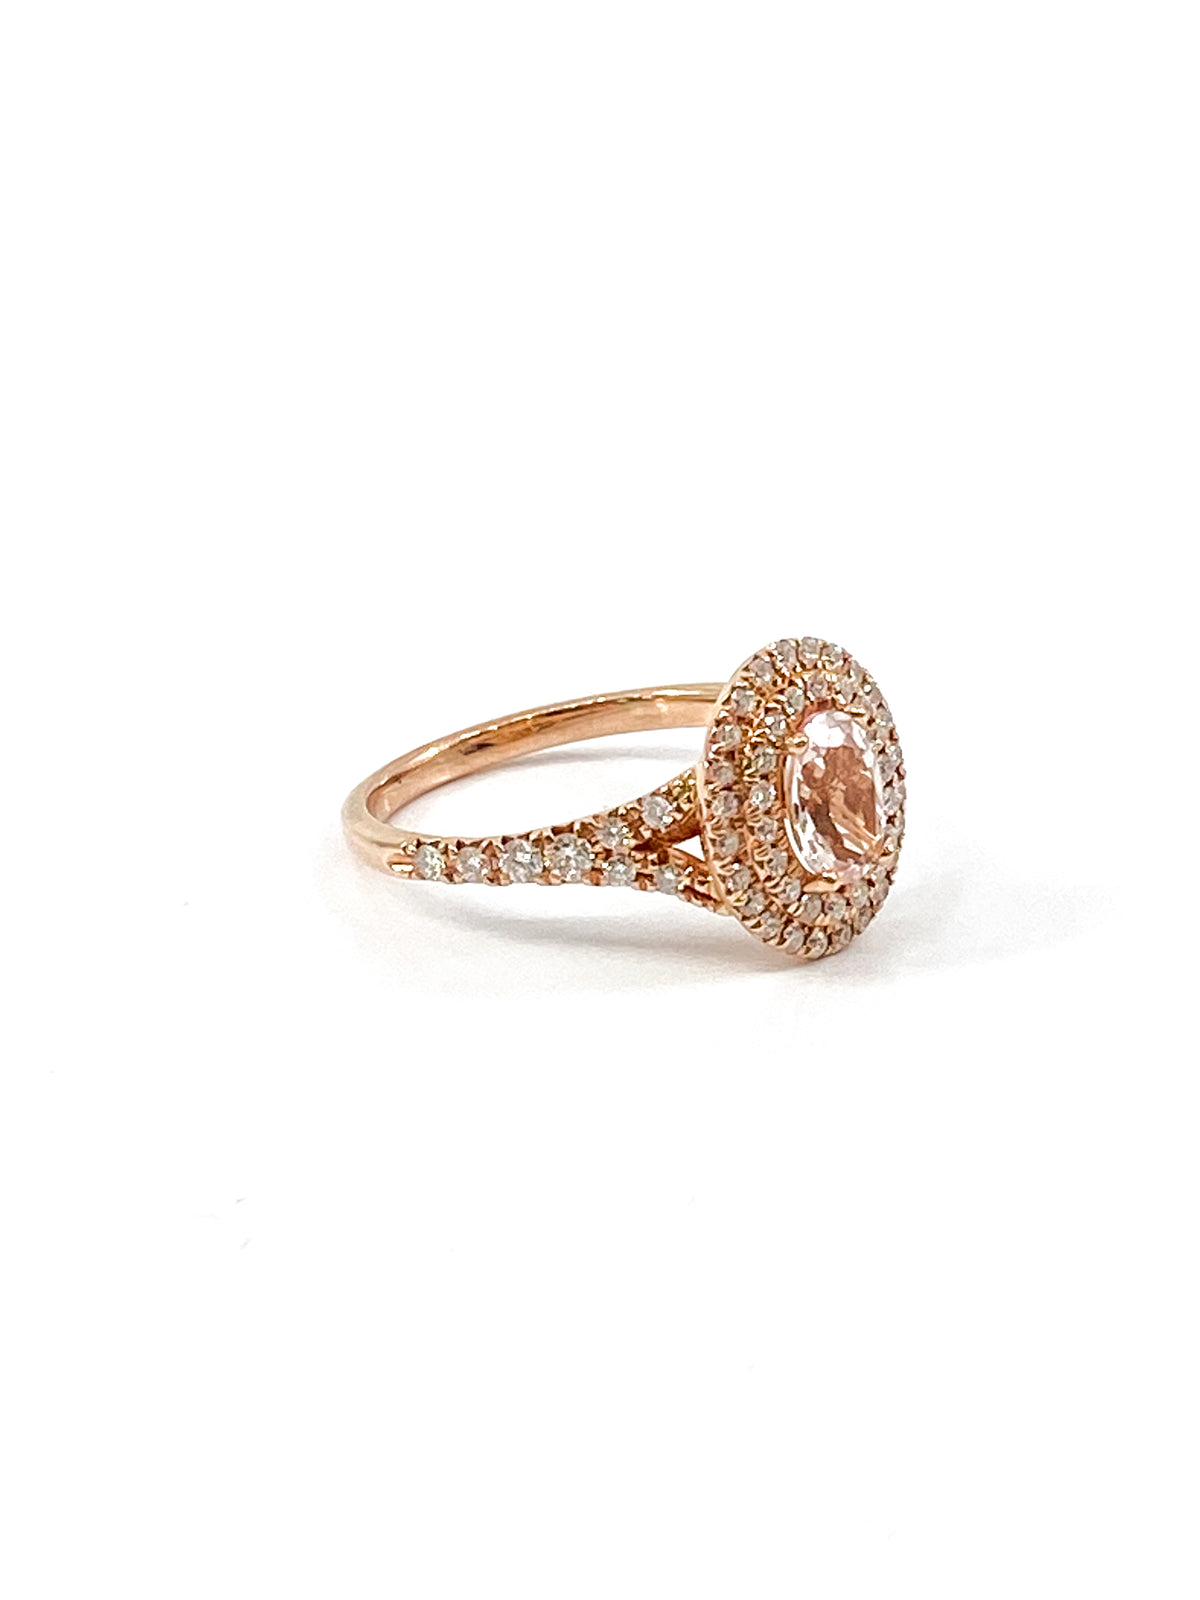 14K Rose Gold 0.75cttw Oval Cut Genuine Morganite &amp; 0.45cttw Diamond Double Halo Ring, size 6.5